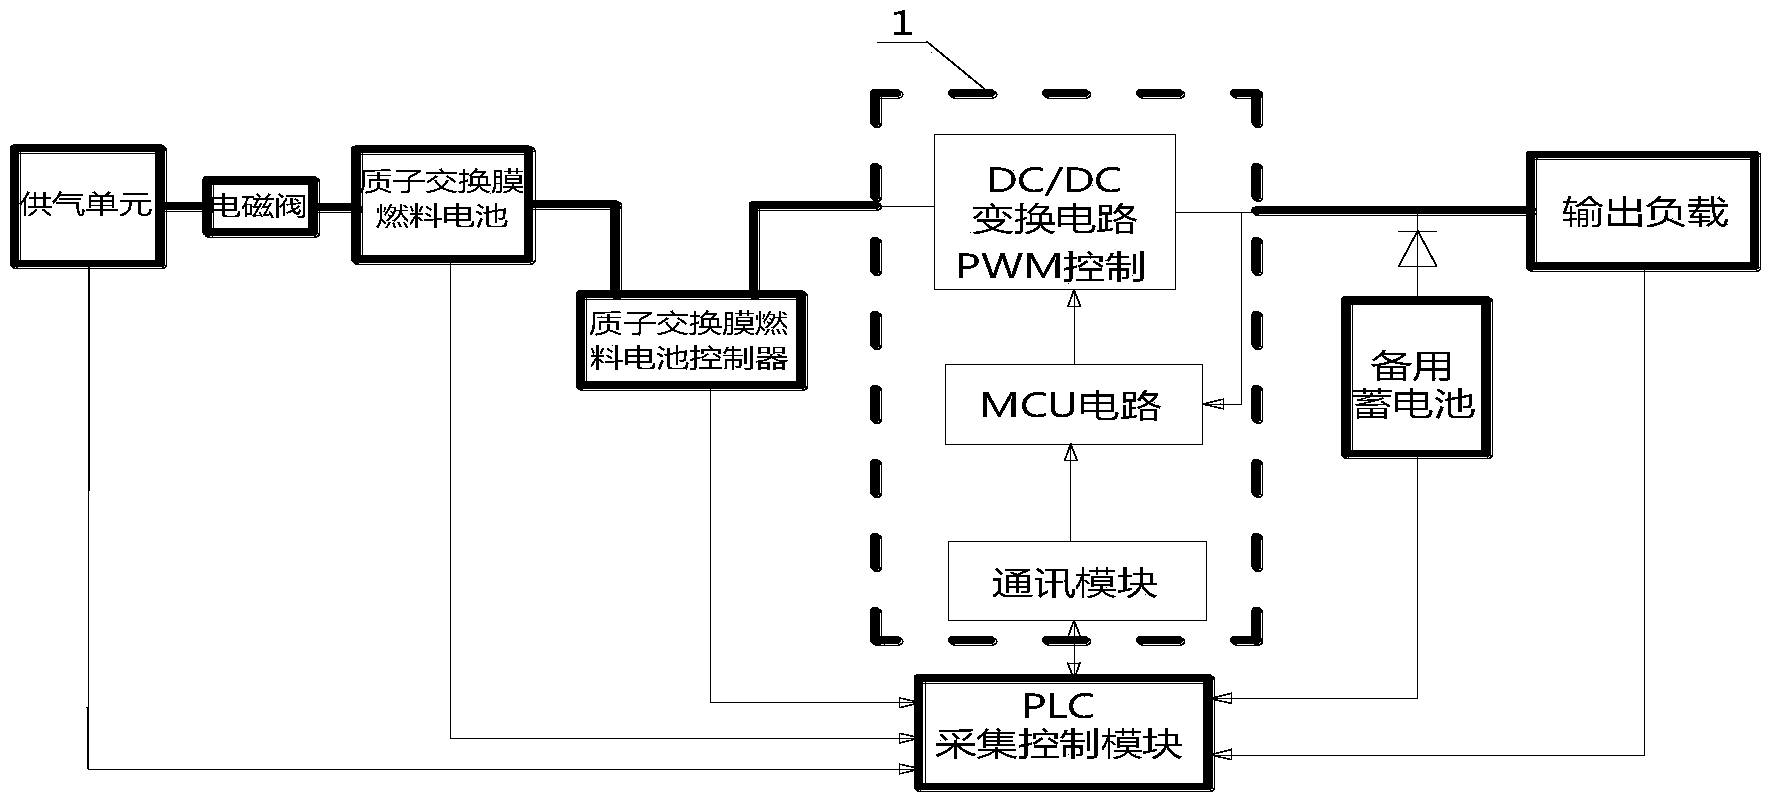 DC/DC conversion and control system used for standby power system of proton exchange membrane fuel cell